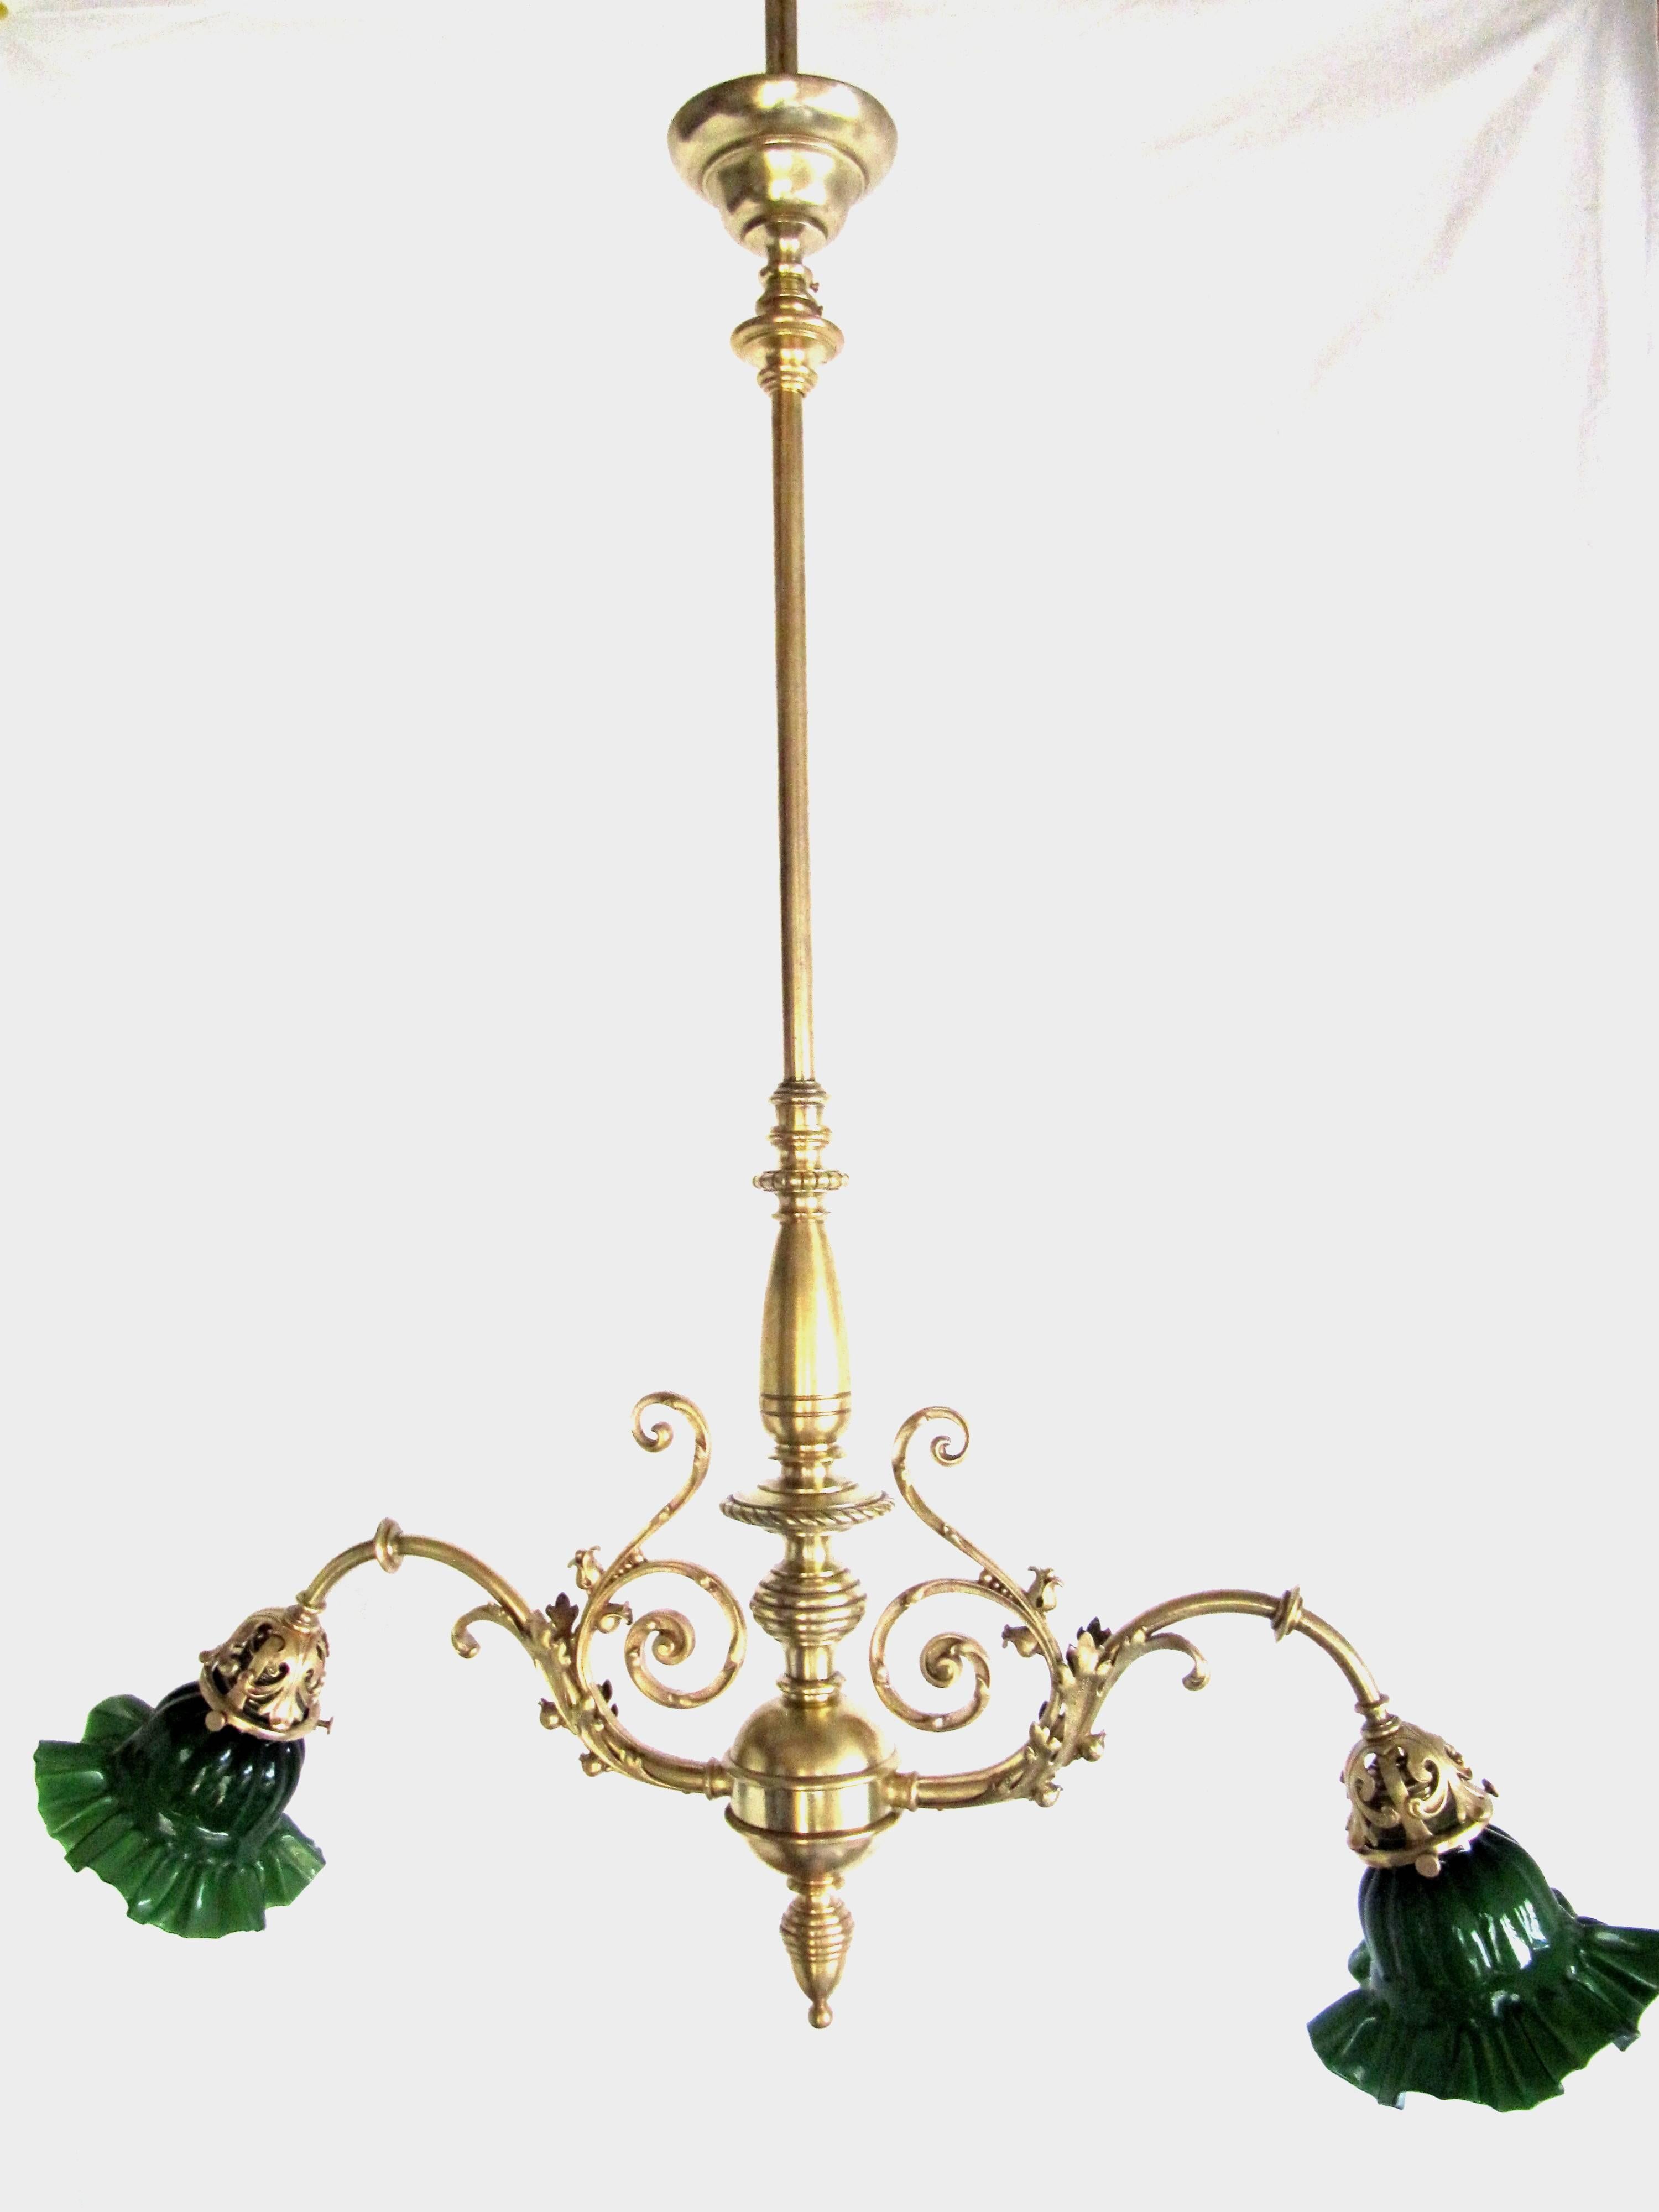 Typical Viennese chandelier from the period the Vienna Ringstrasse (built 1860-1910).
Solid gold plated double-lamp ceiling lamp. Green cased glass lampshades. Restored condition!